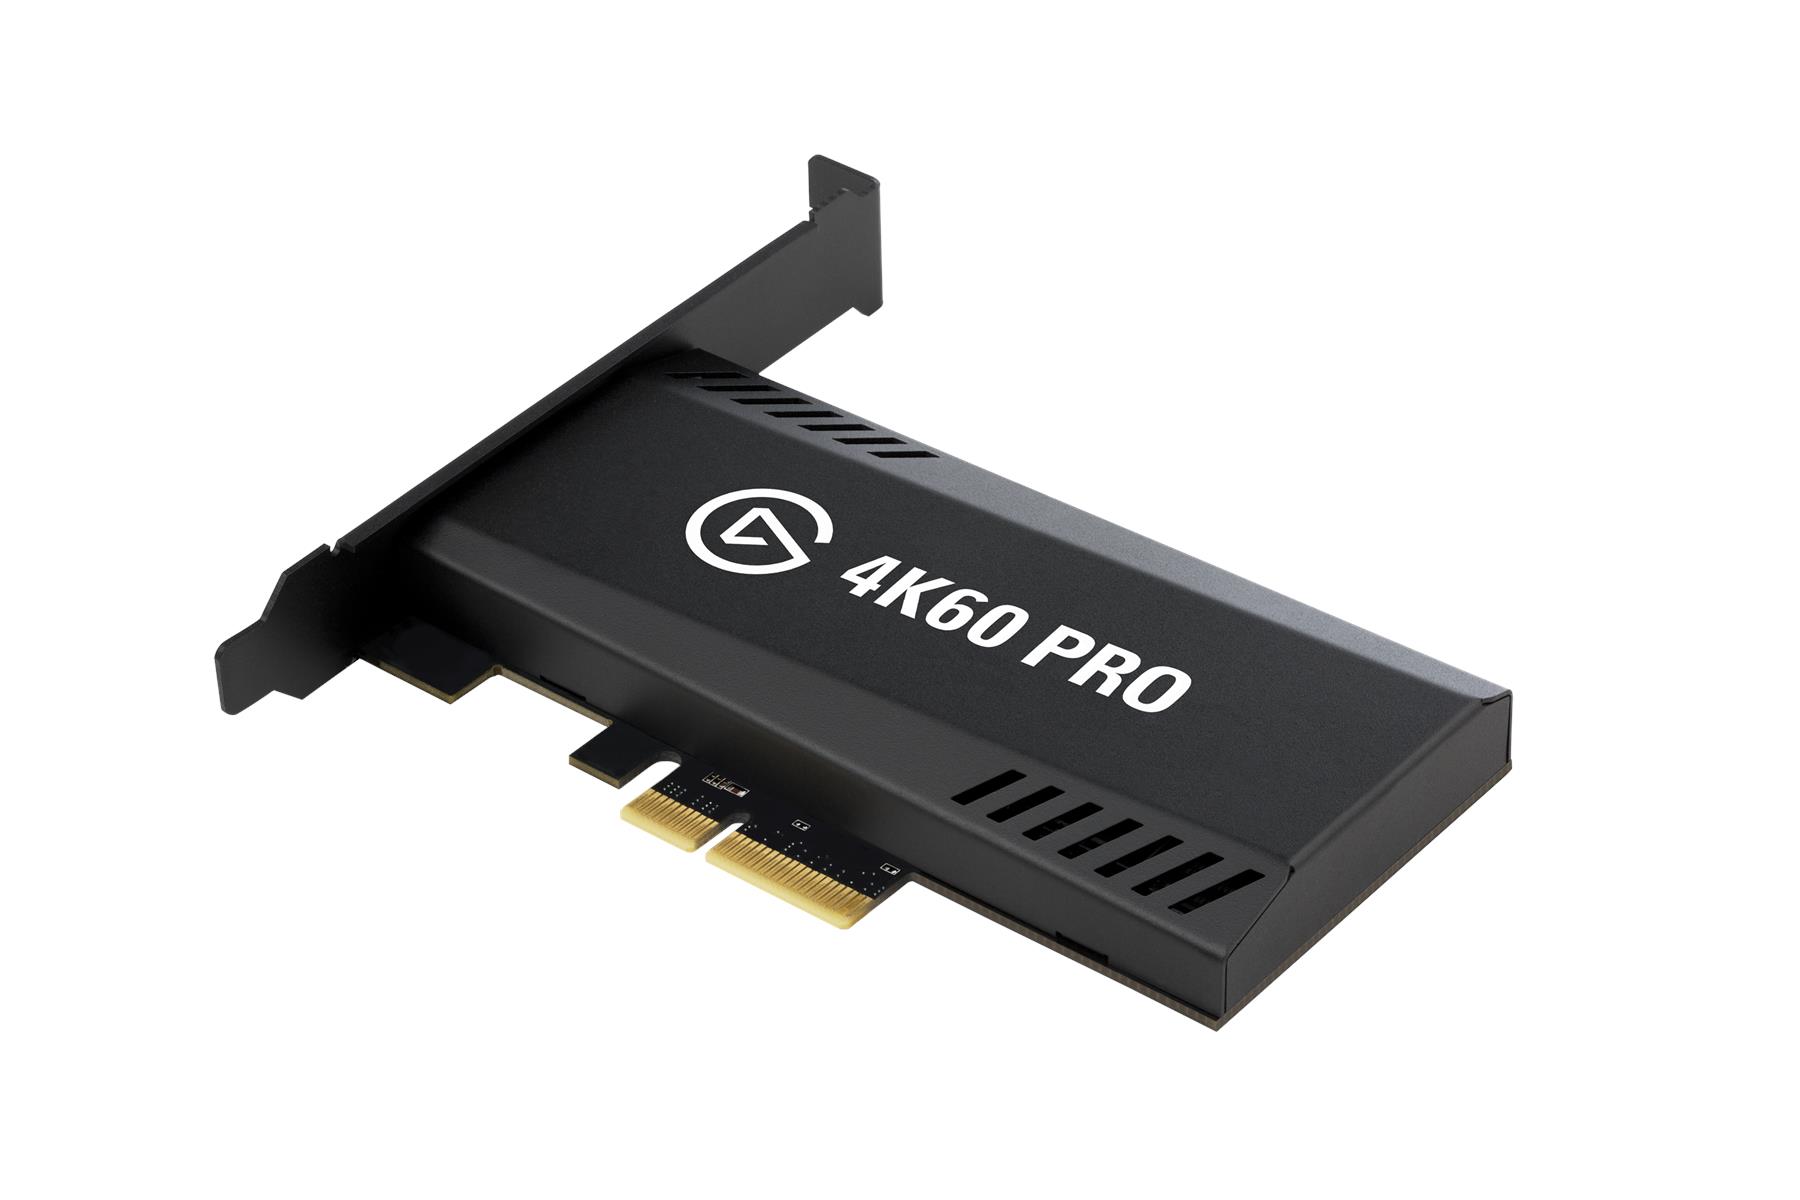 Capture 4K HDR Flawlessly: Elgato Launches 4K60 Pro MK.2 Capture Card